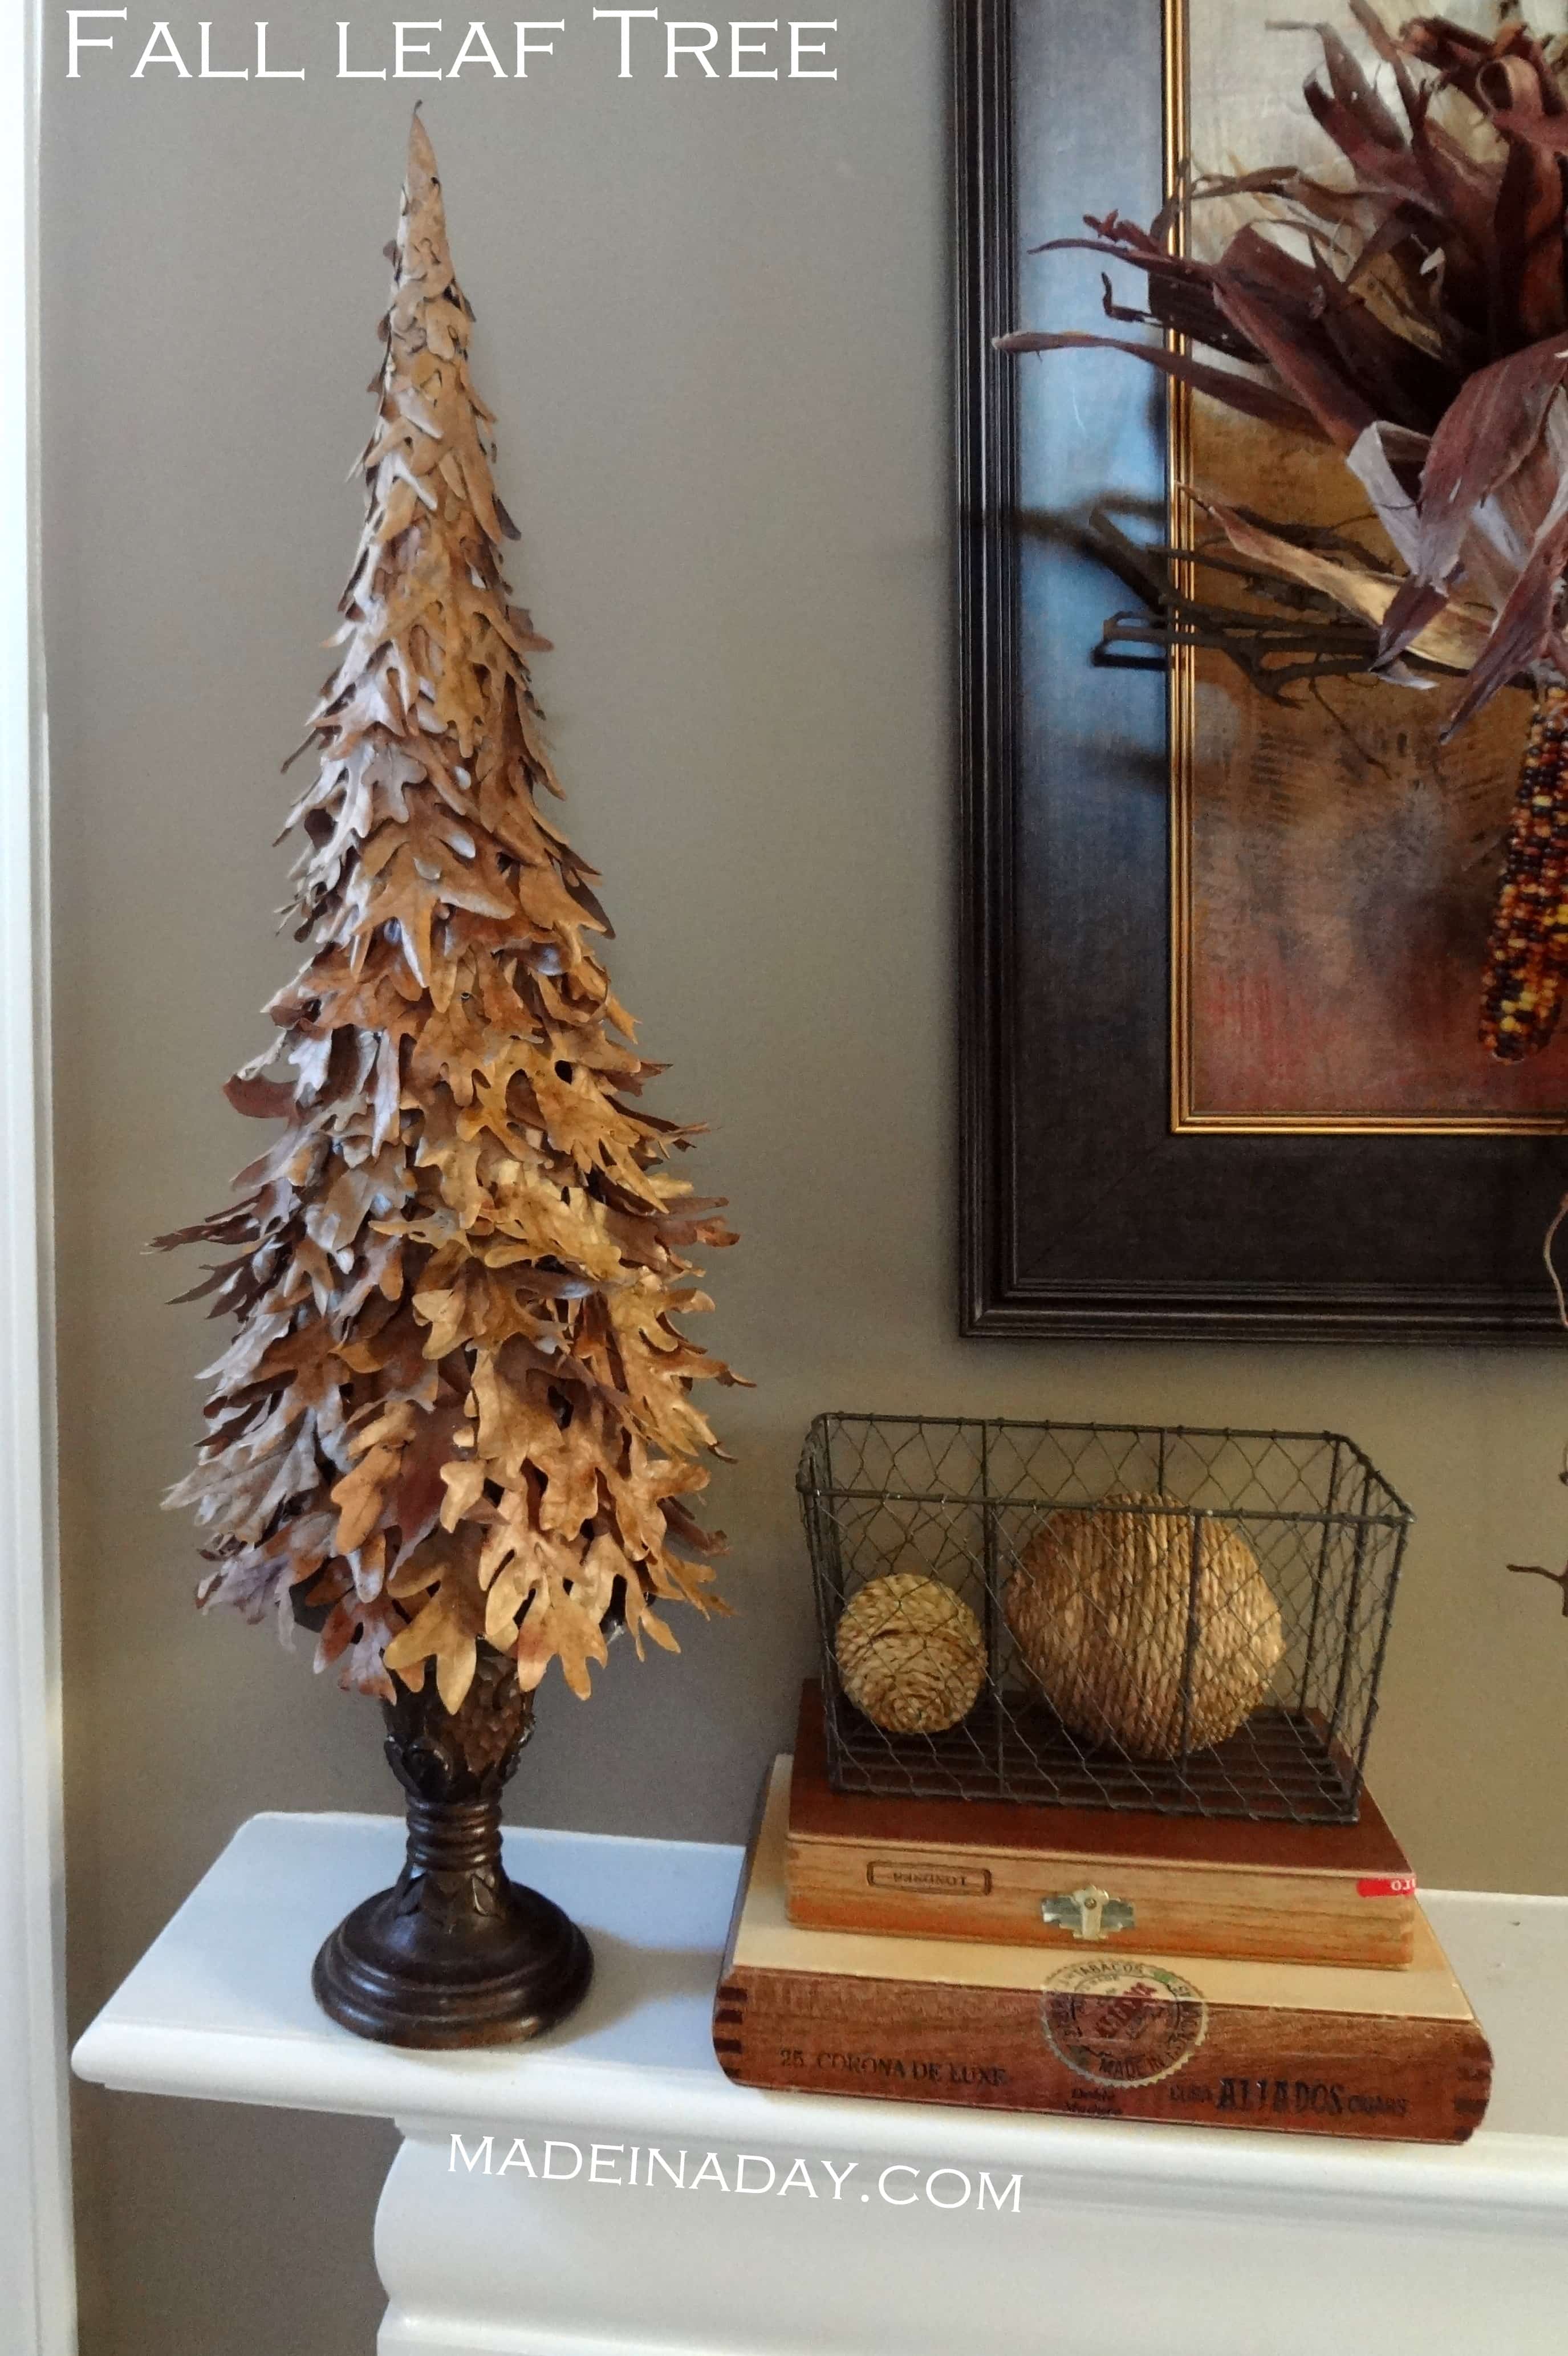 A mini tree made of leaves on the mantel.